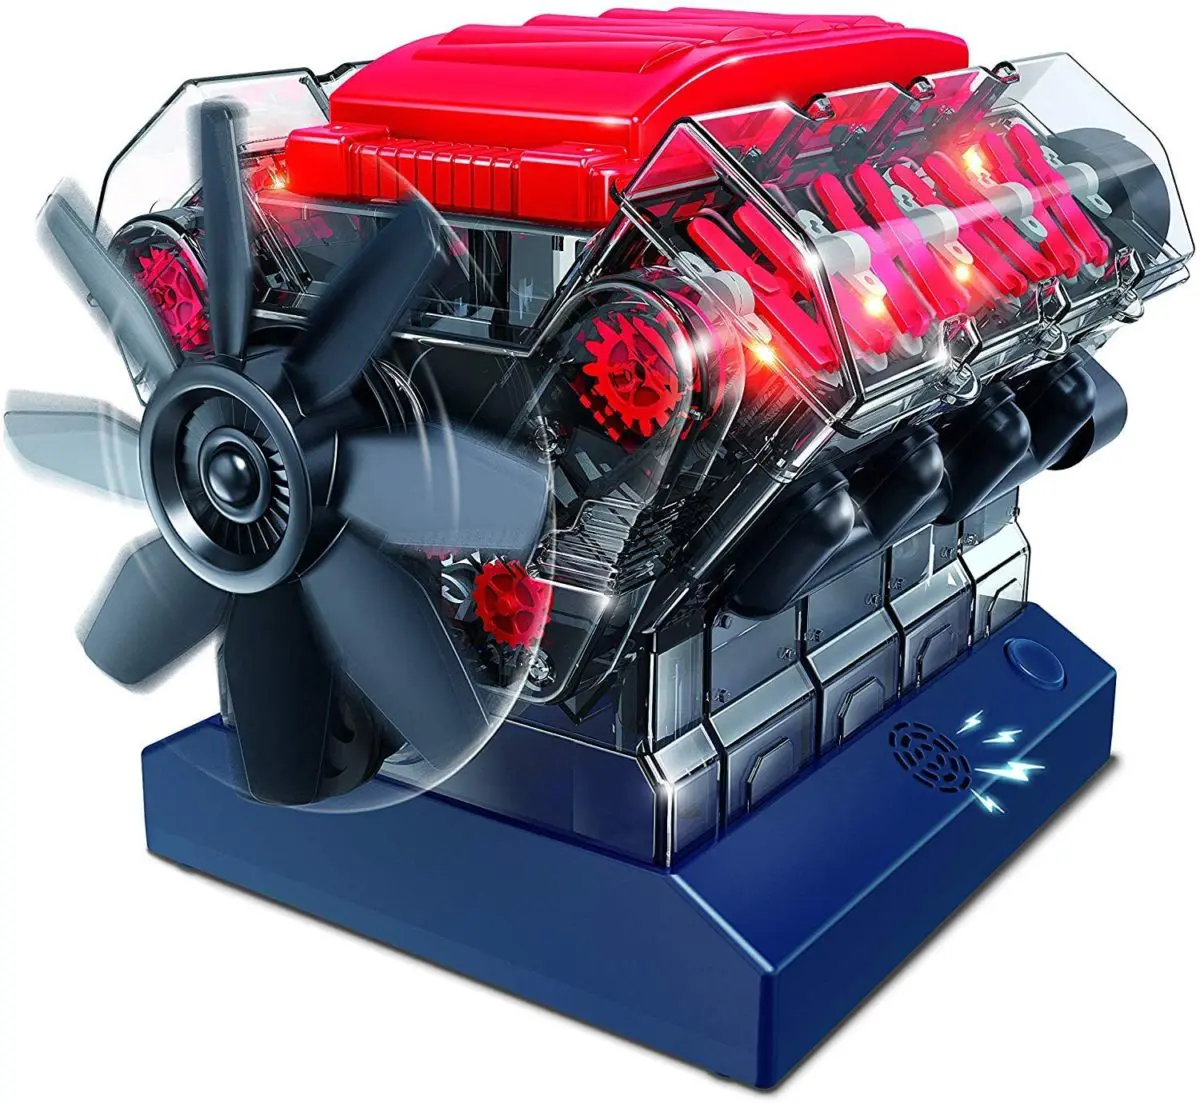 KidGenio Build Your Own 3D Model Engine - Top Toys and Gifts for Ten Year Old Boys 2